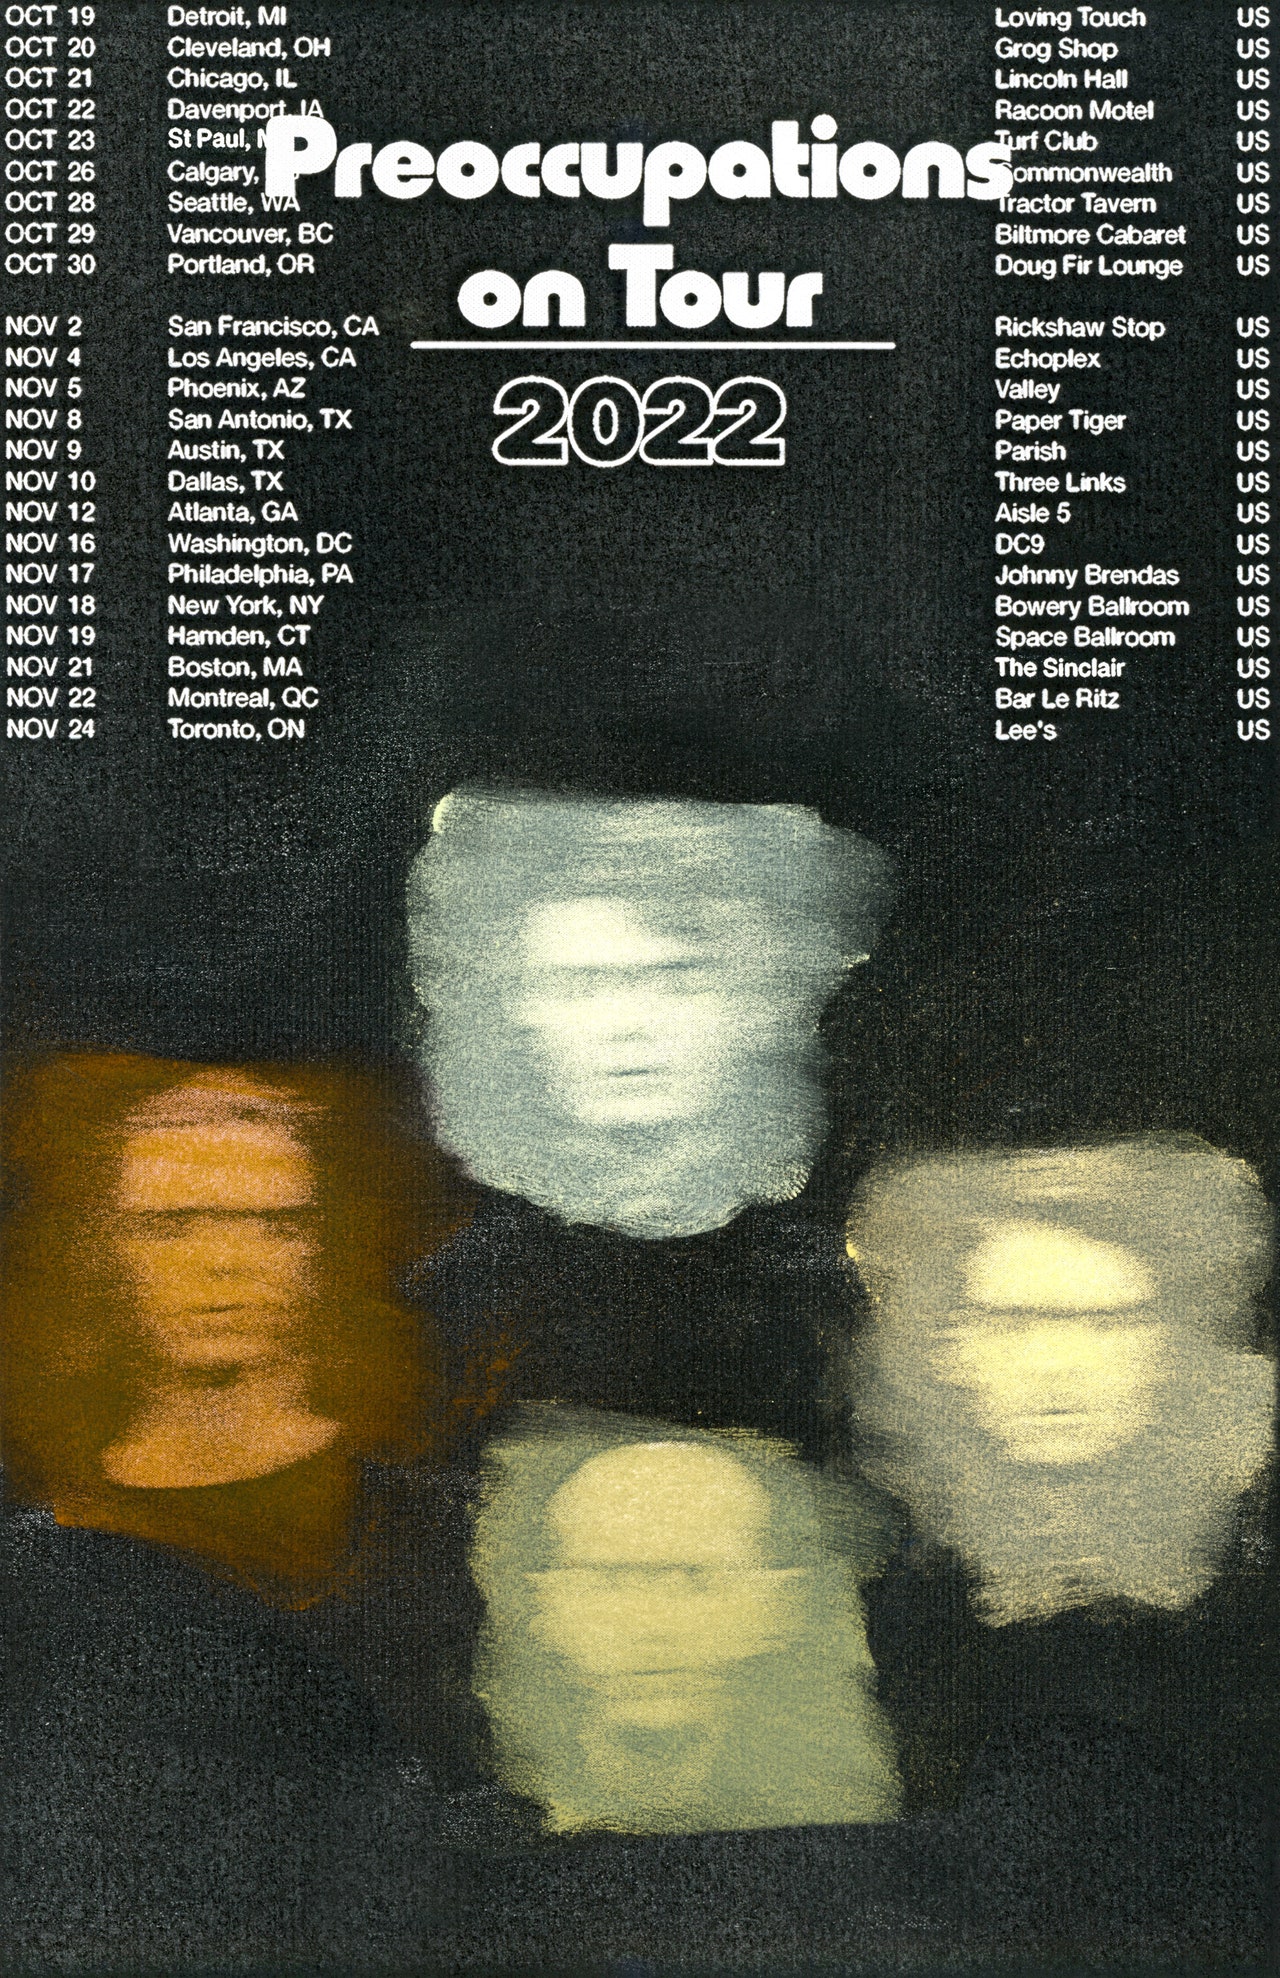 Preoccupations on Tour 2022